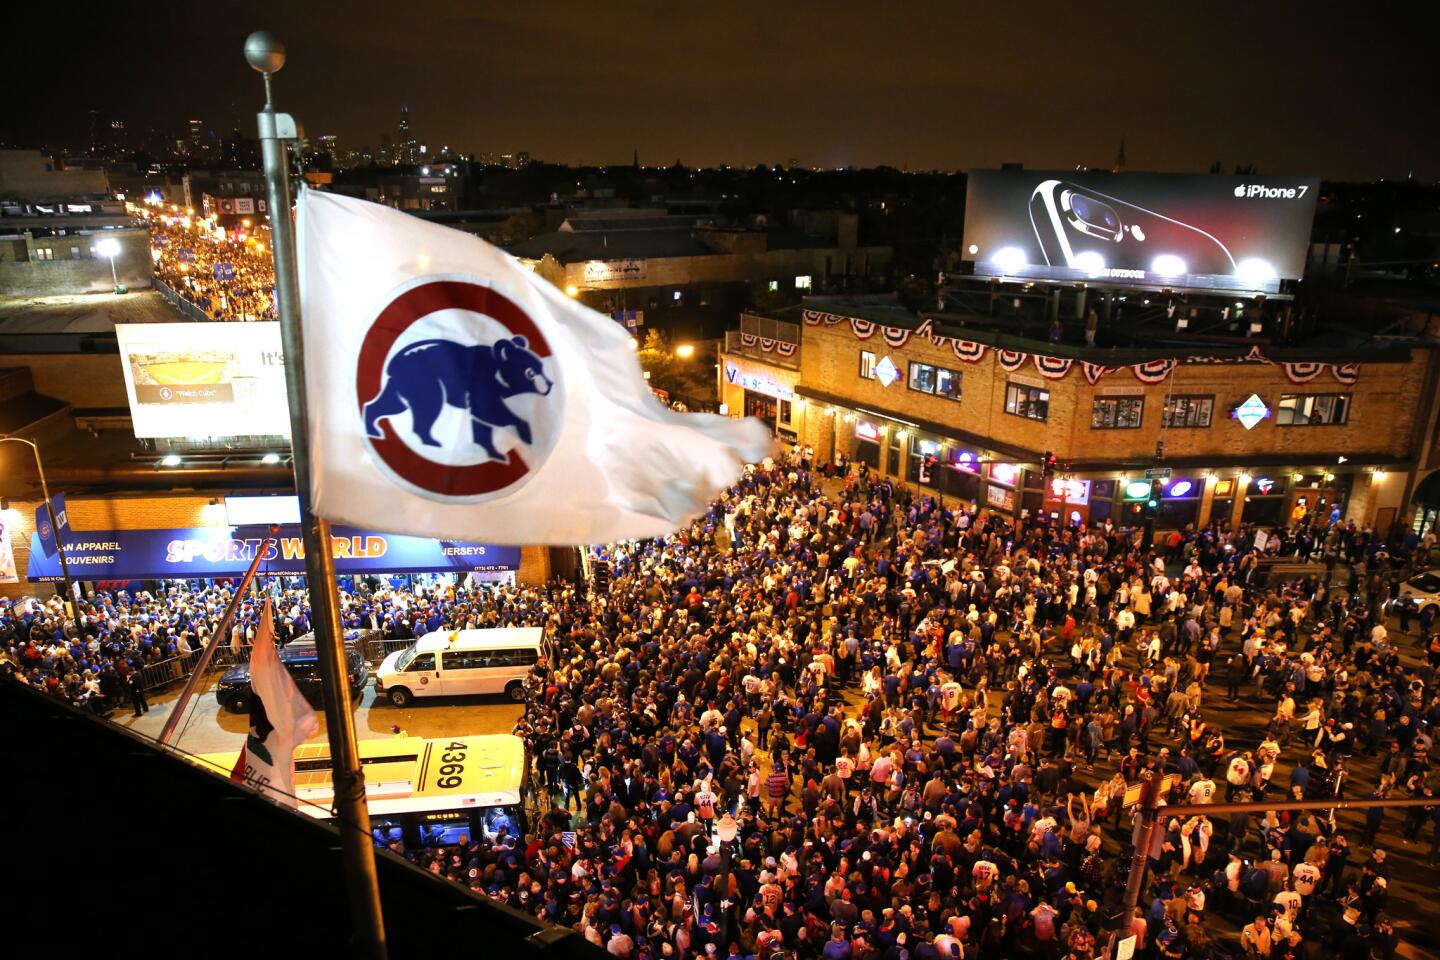 Fans crowd the intersection of Addison and Clark after the Cubs' 8-4 win over the Dodgers.